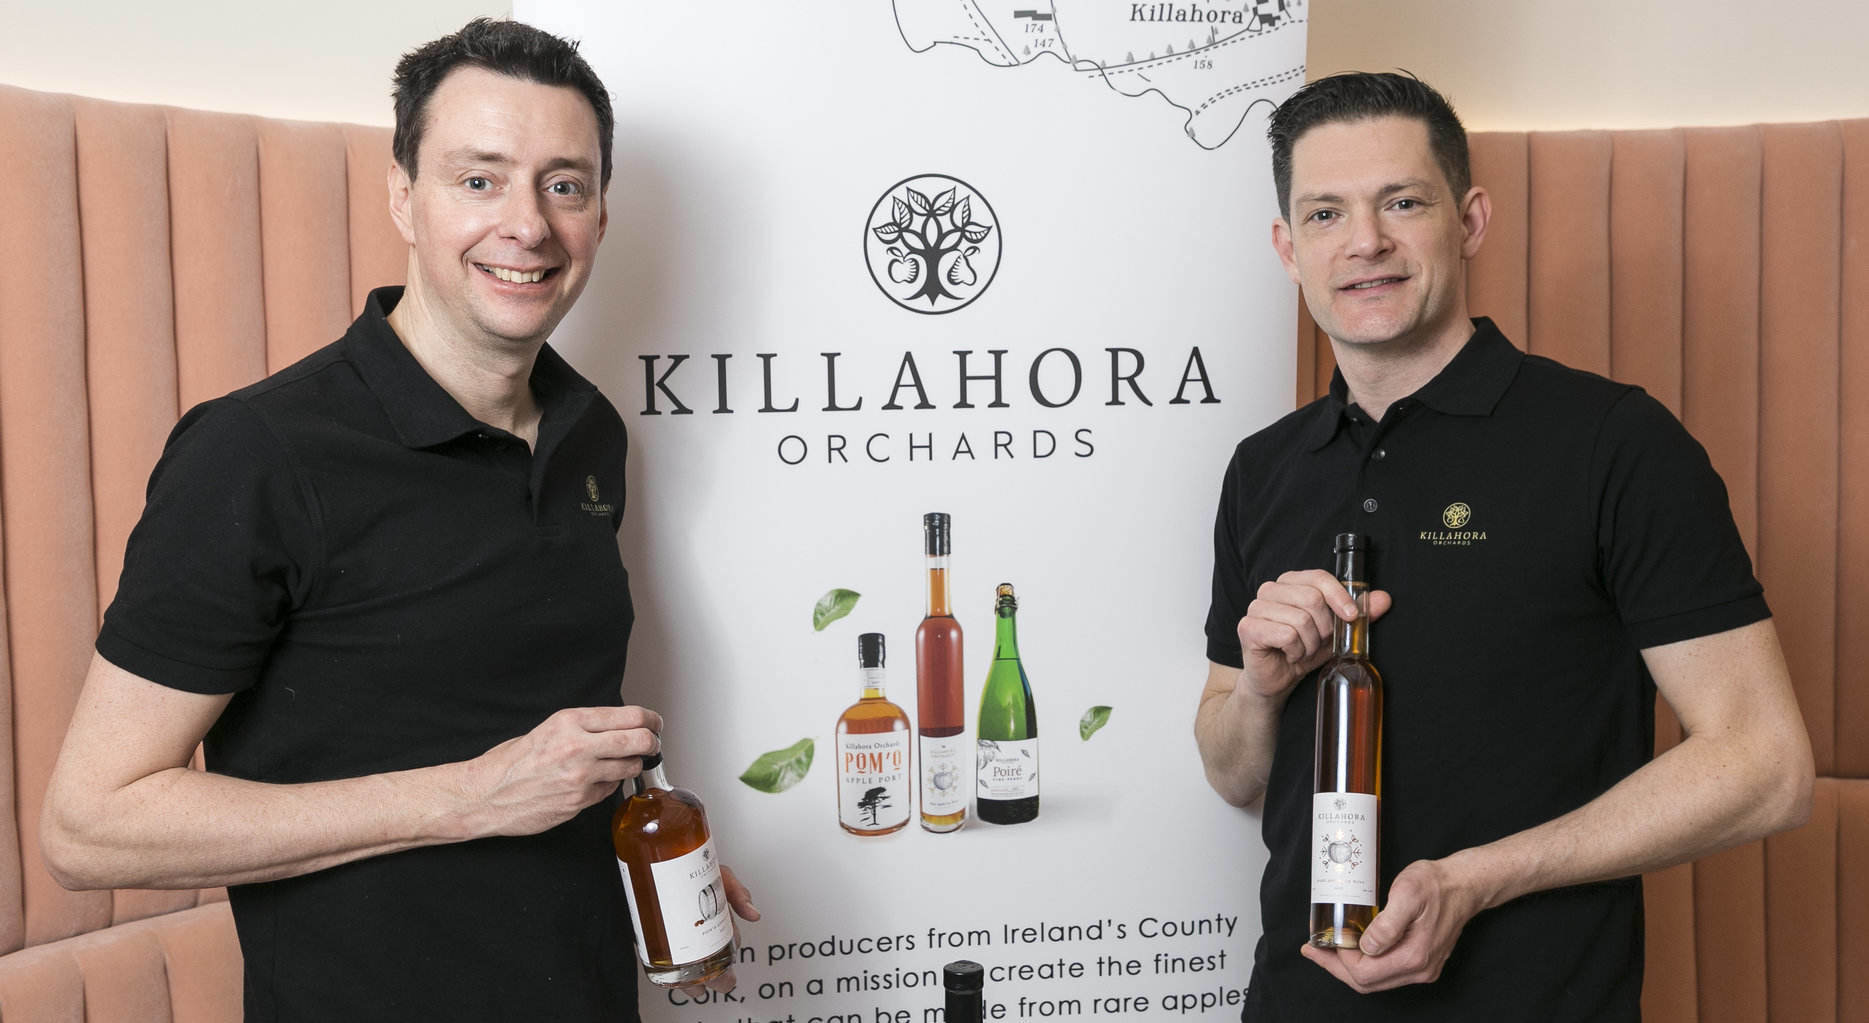 From left: David Watson and Barry Walsh of Killahora Orchards.